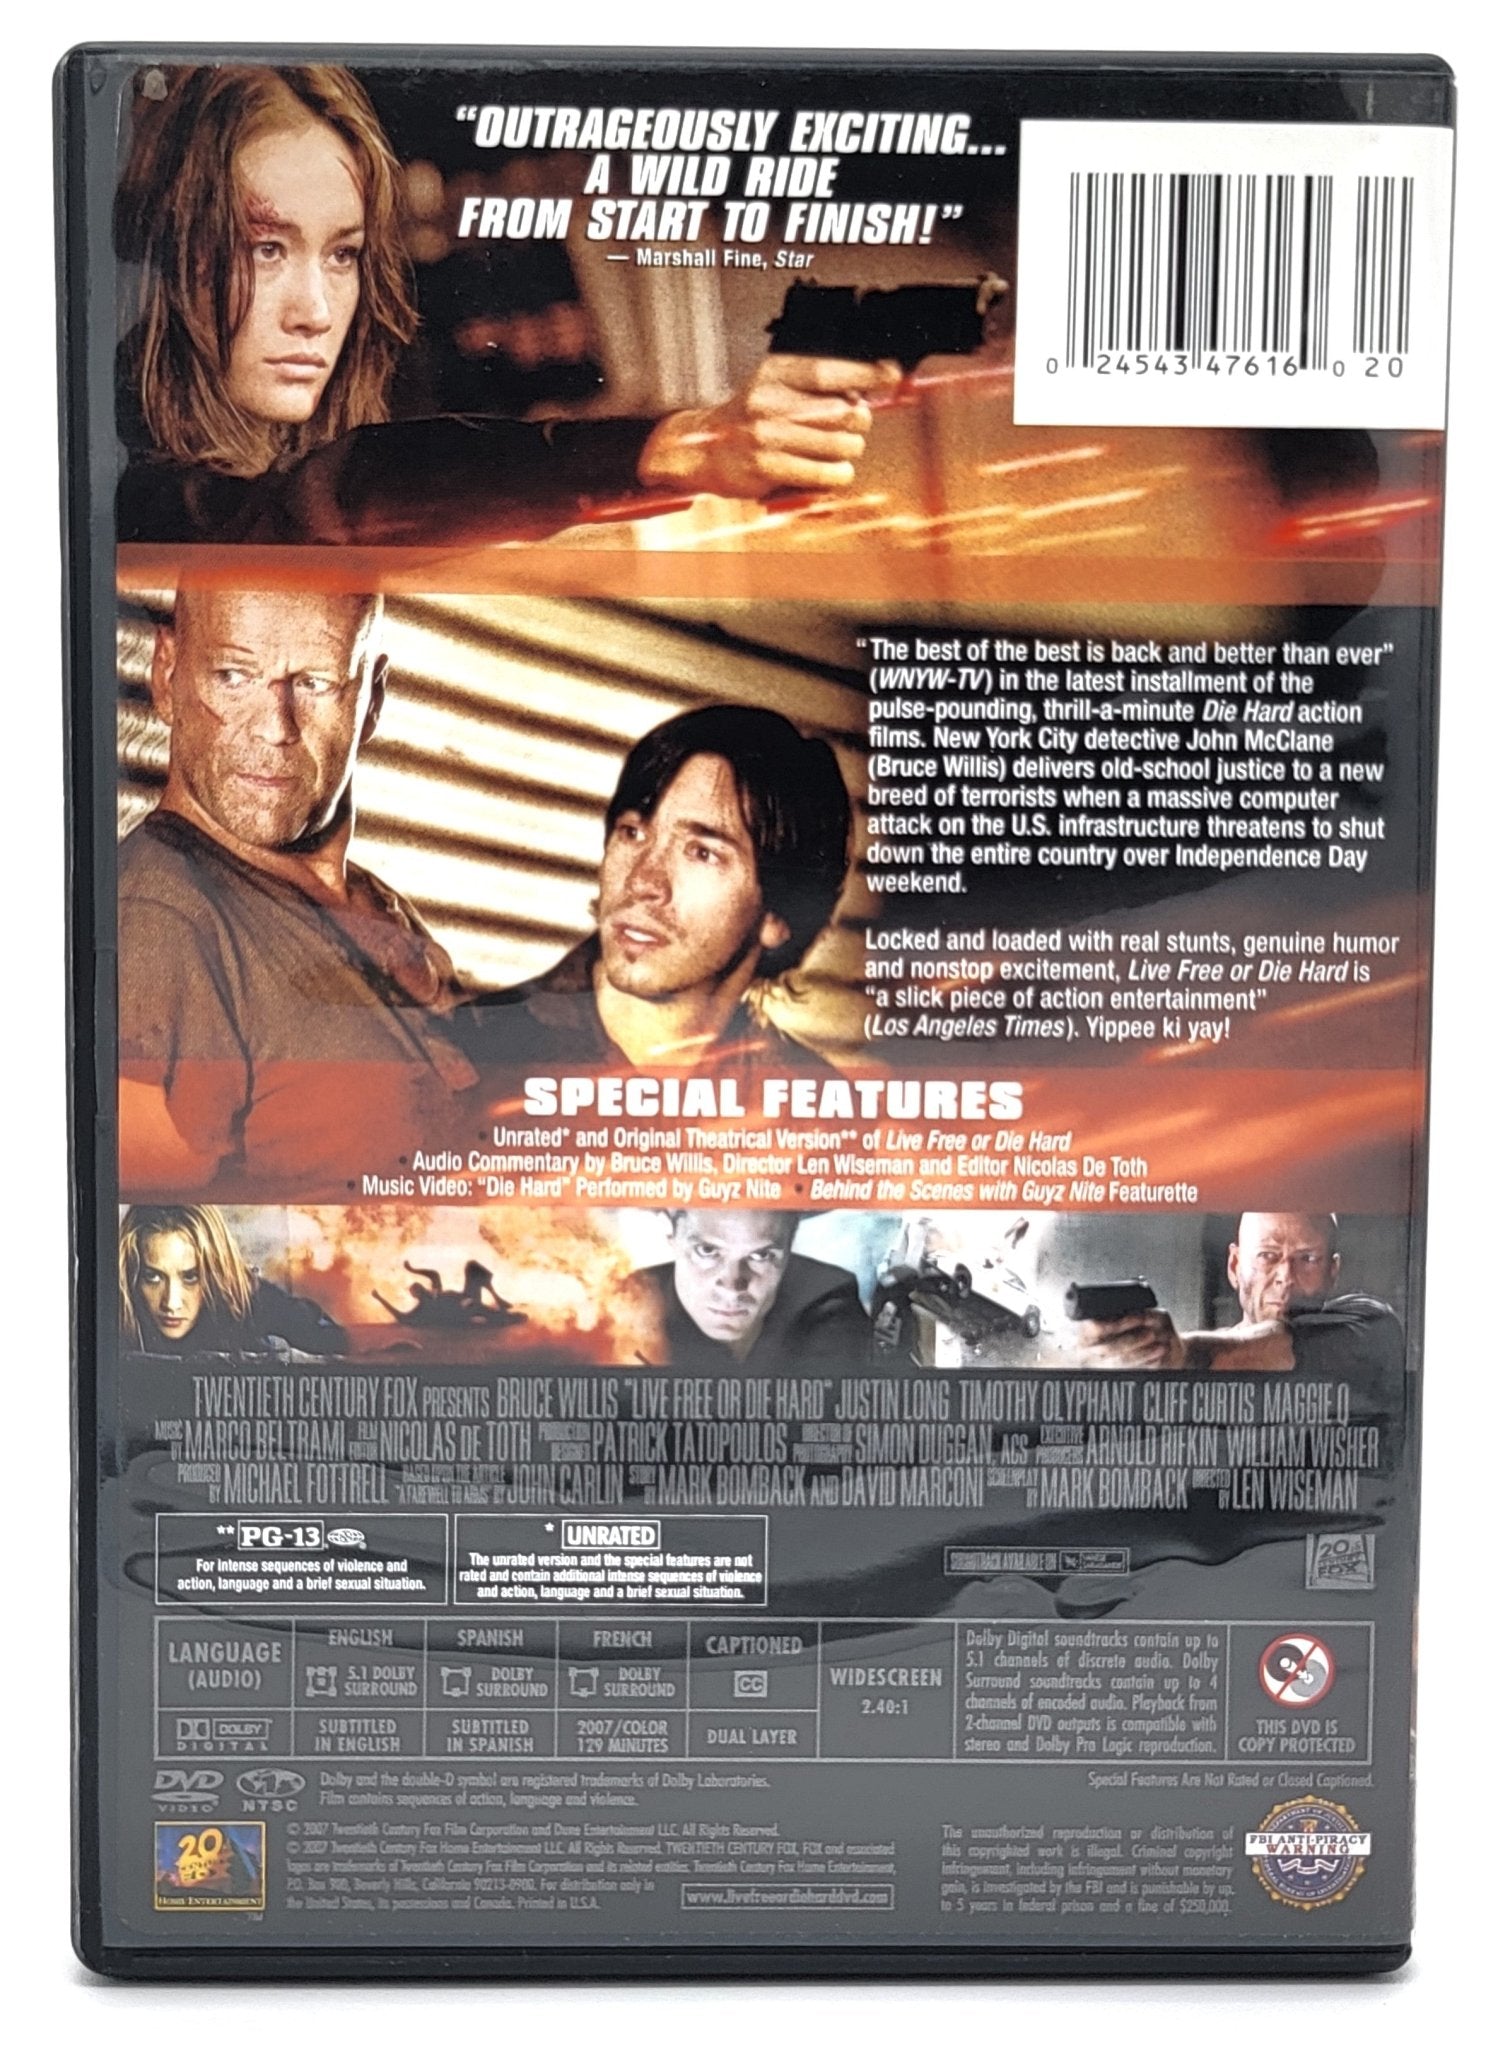 20th Century Fox - Live Free or Die Hard | DVD | Unrated - Widescreen - DVD - Steady Bunny Shop